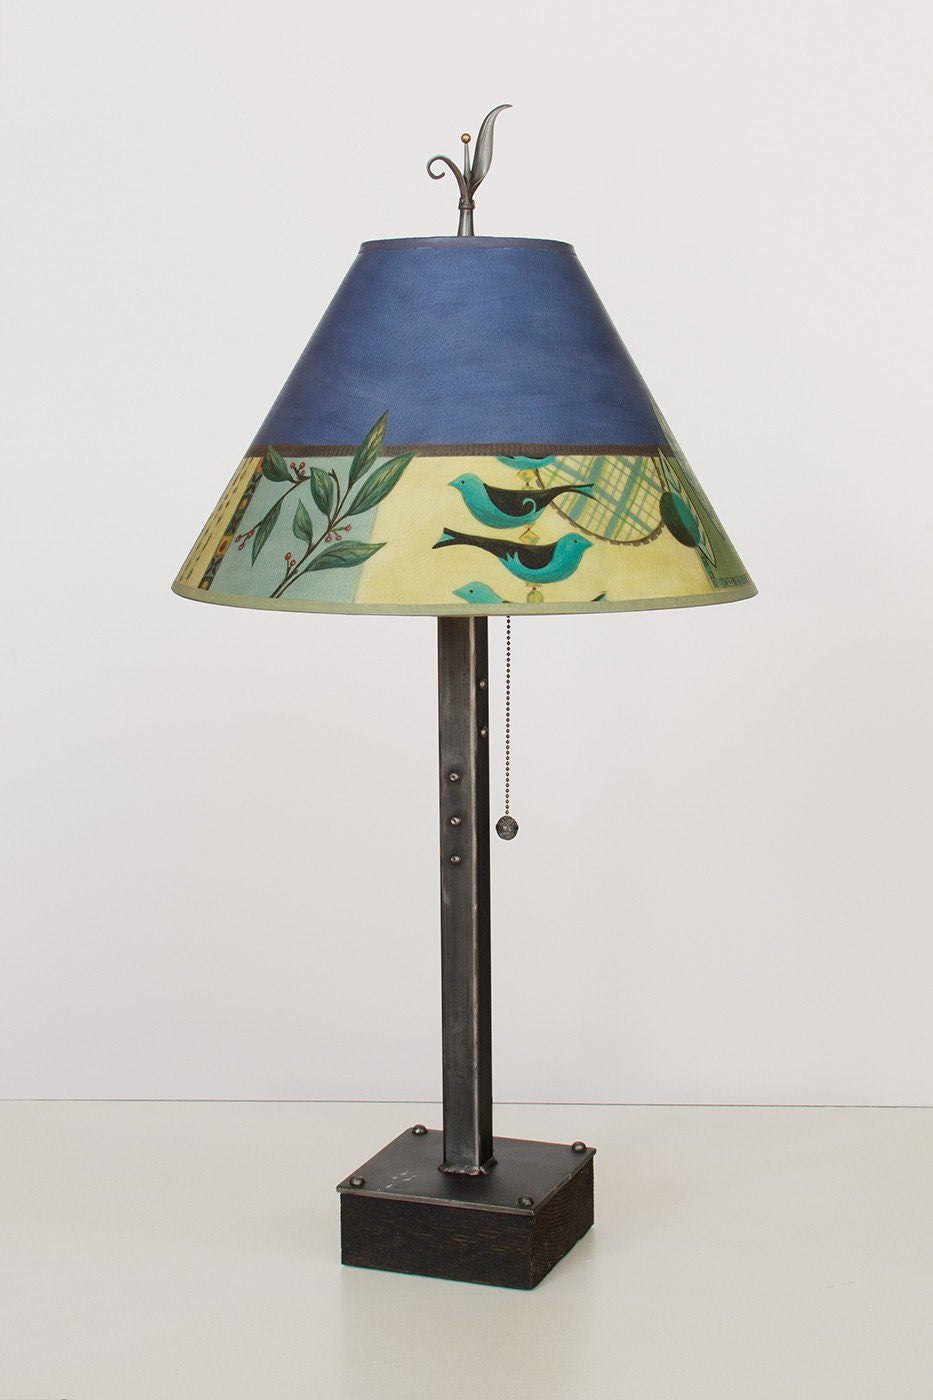 Steel Table Lamp on Wood with Medium Conical Shade in New Capri Periwinkle